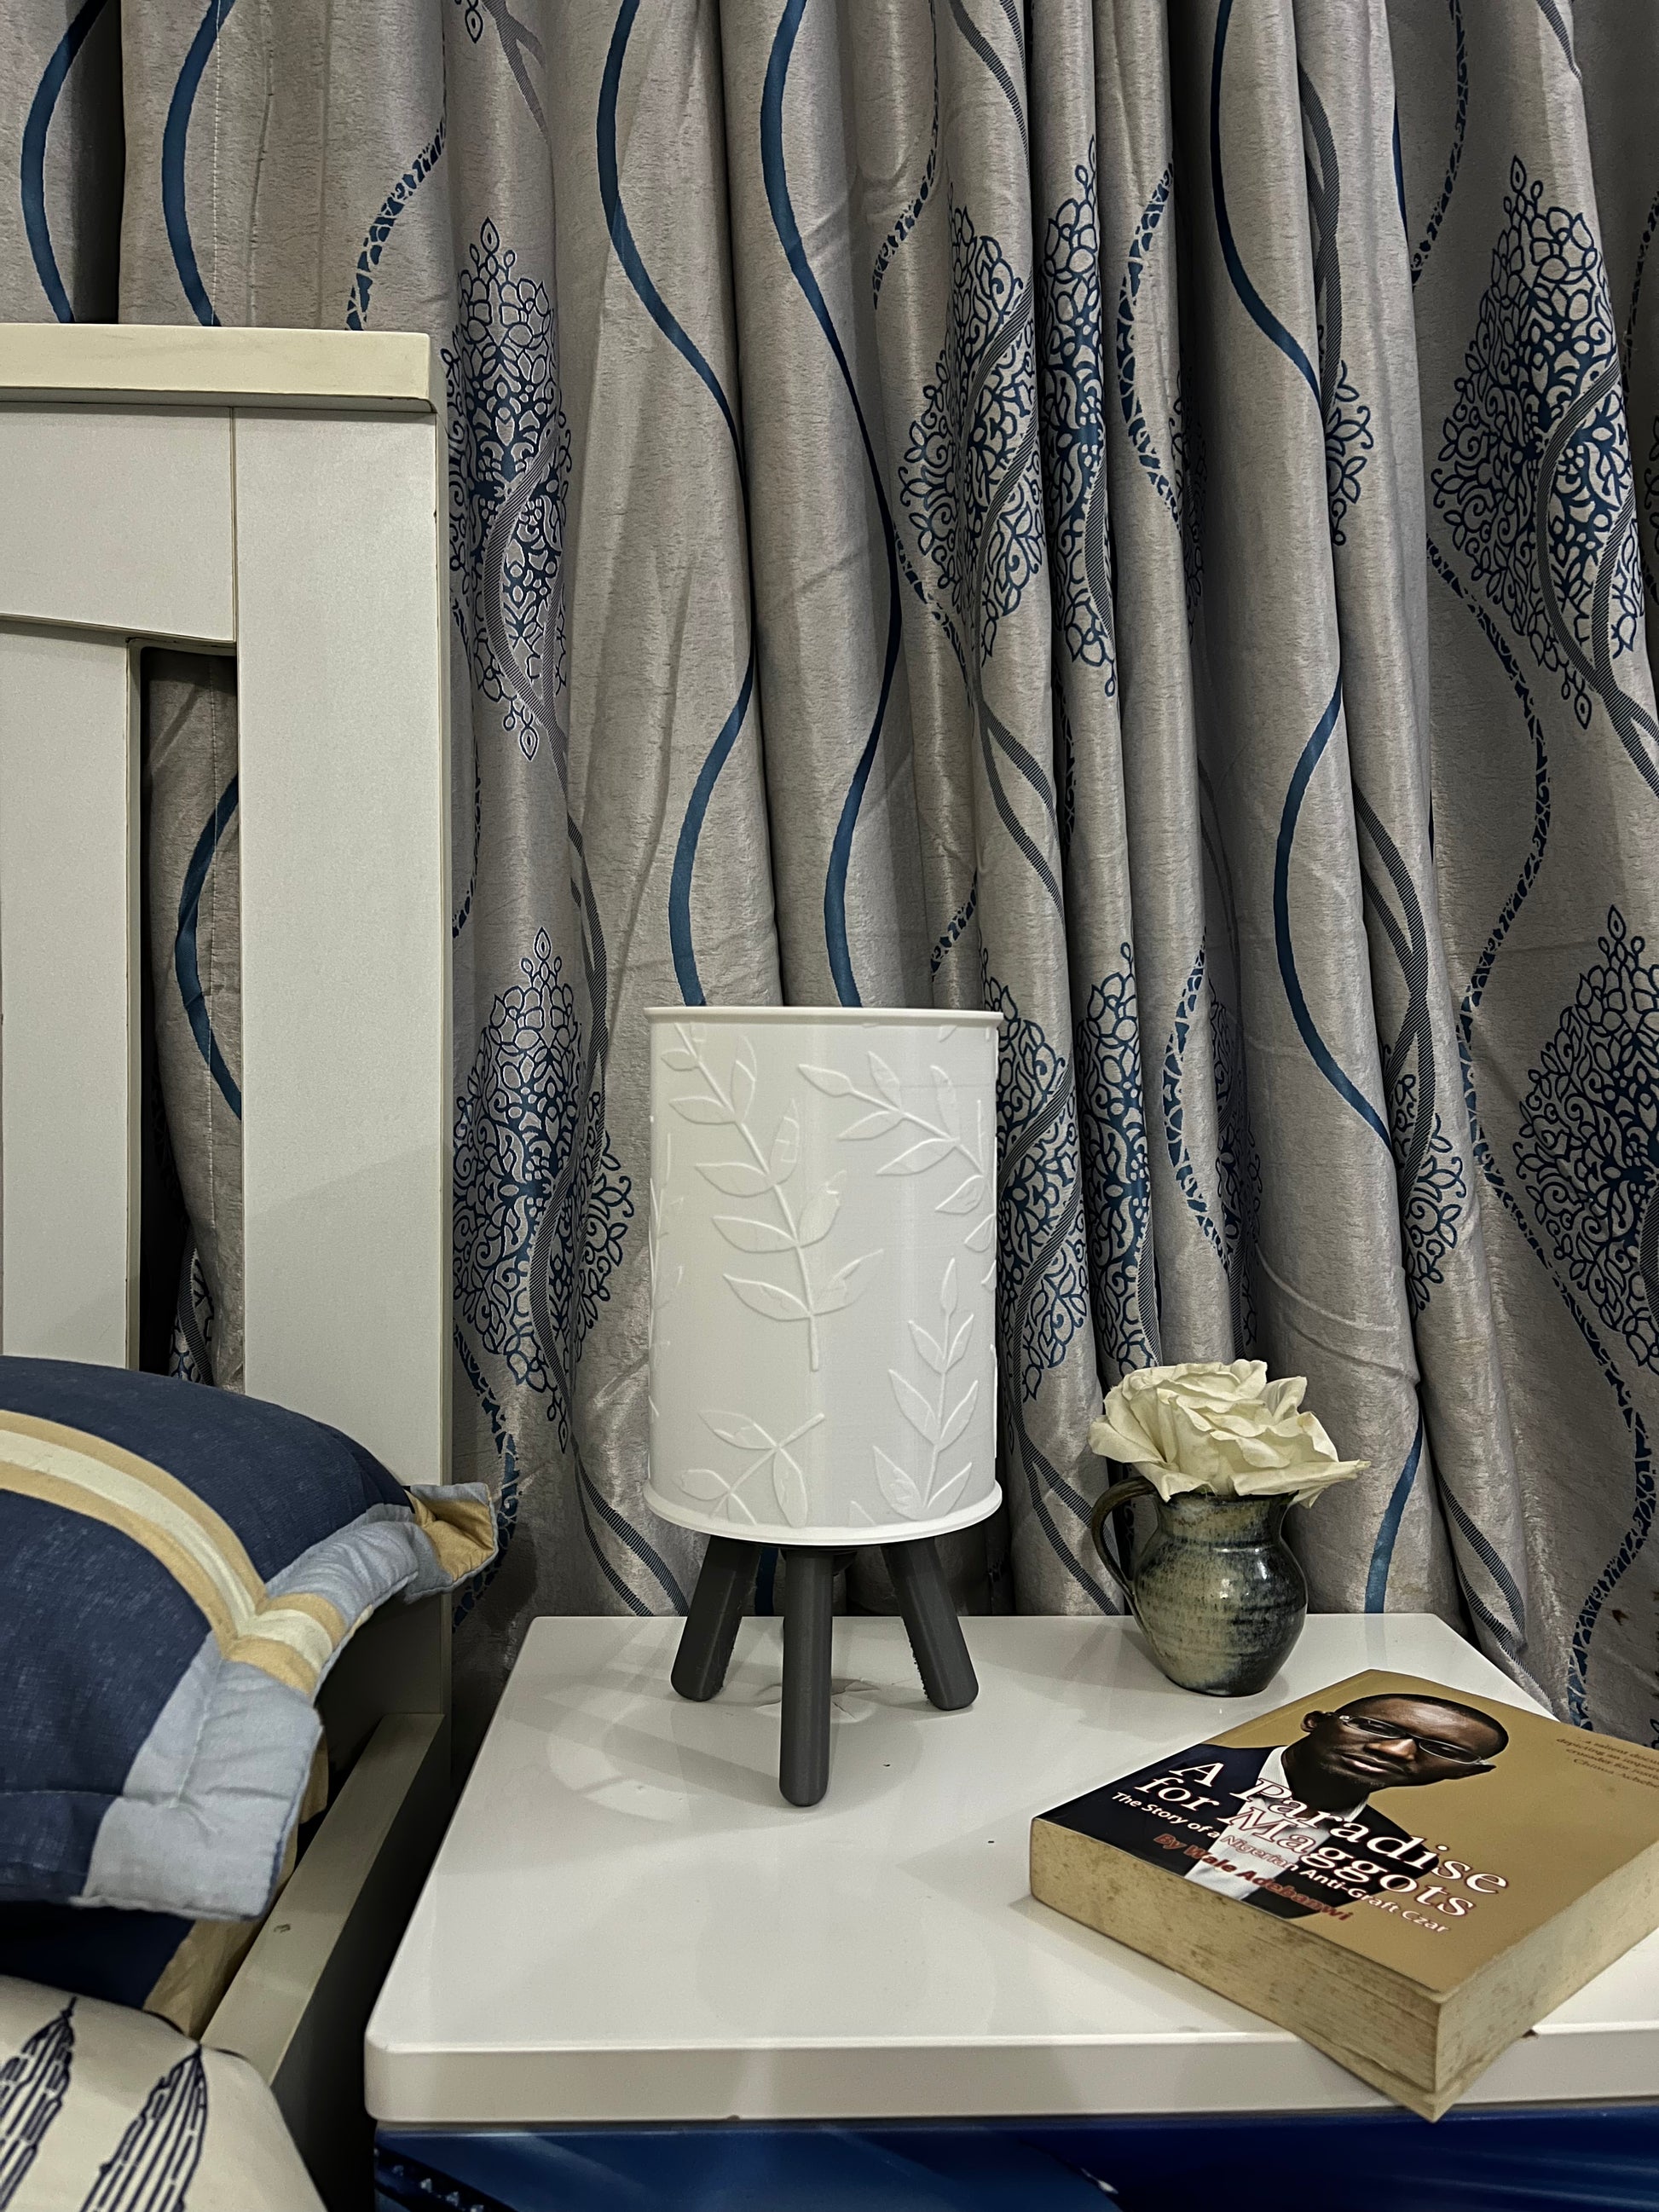 3D printed grey Hako bedside/table lamp on a bedside table with lights off